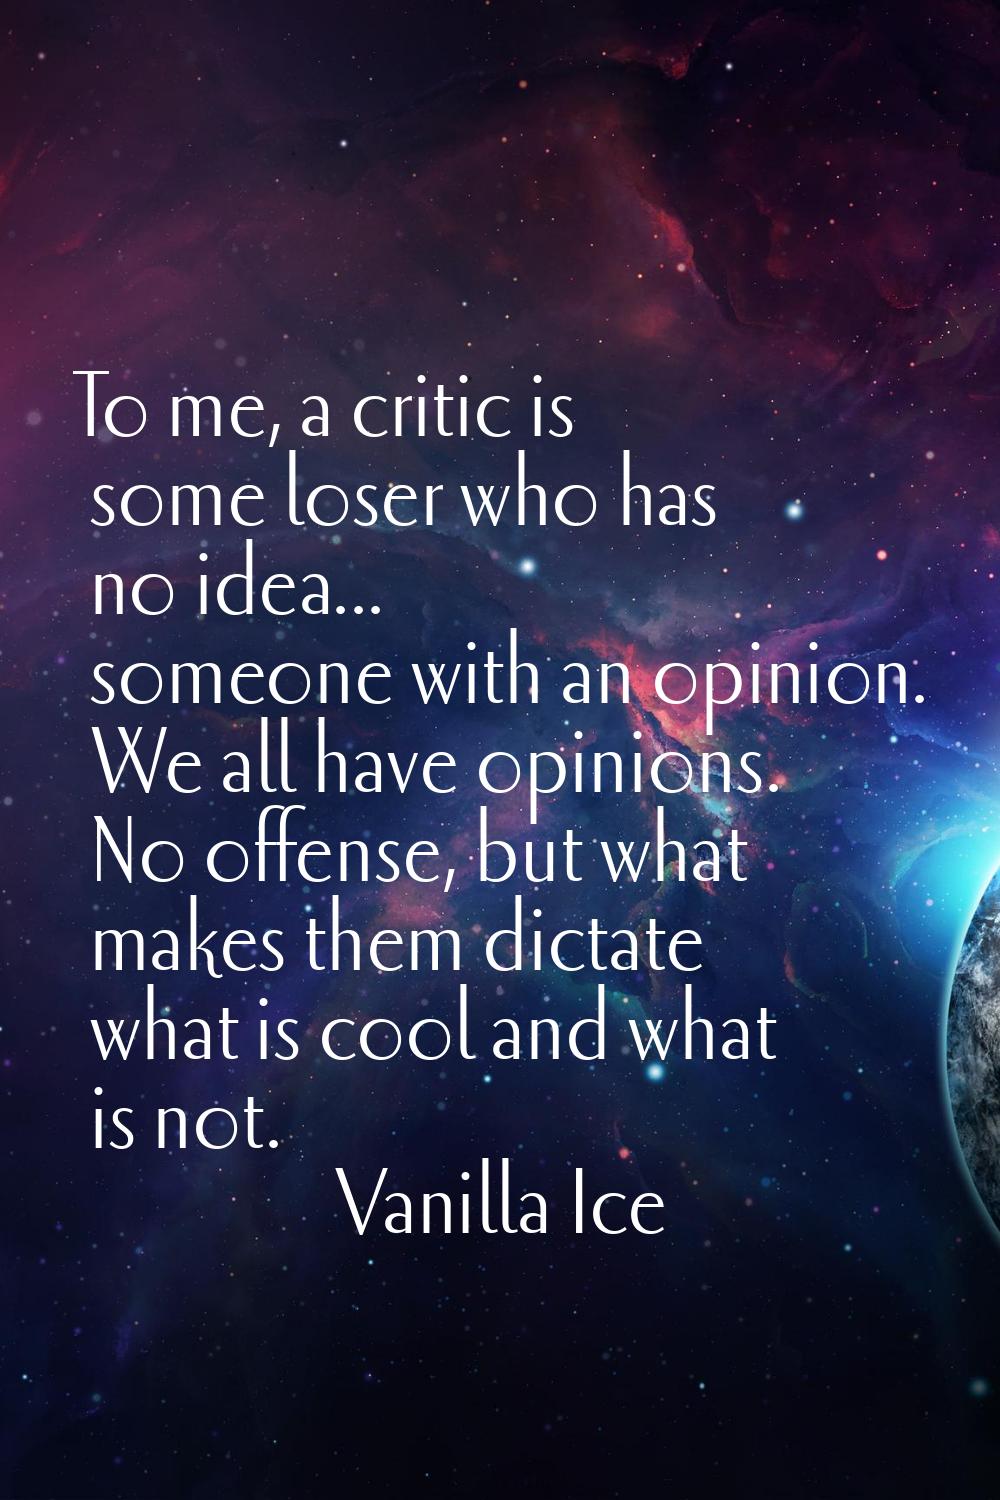 To me, a critic is some loser who has no idea... someone with an opinion. We all have opinions. No 